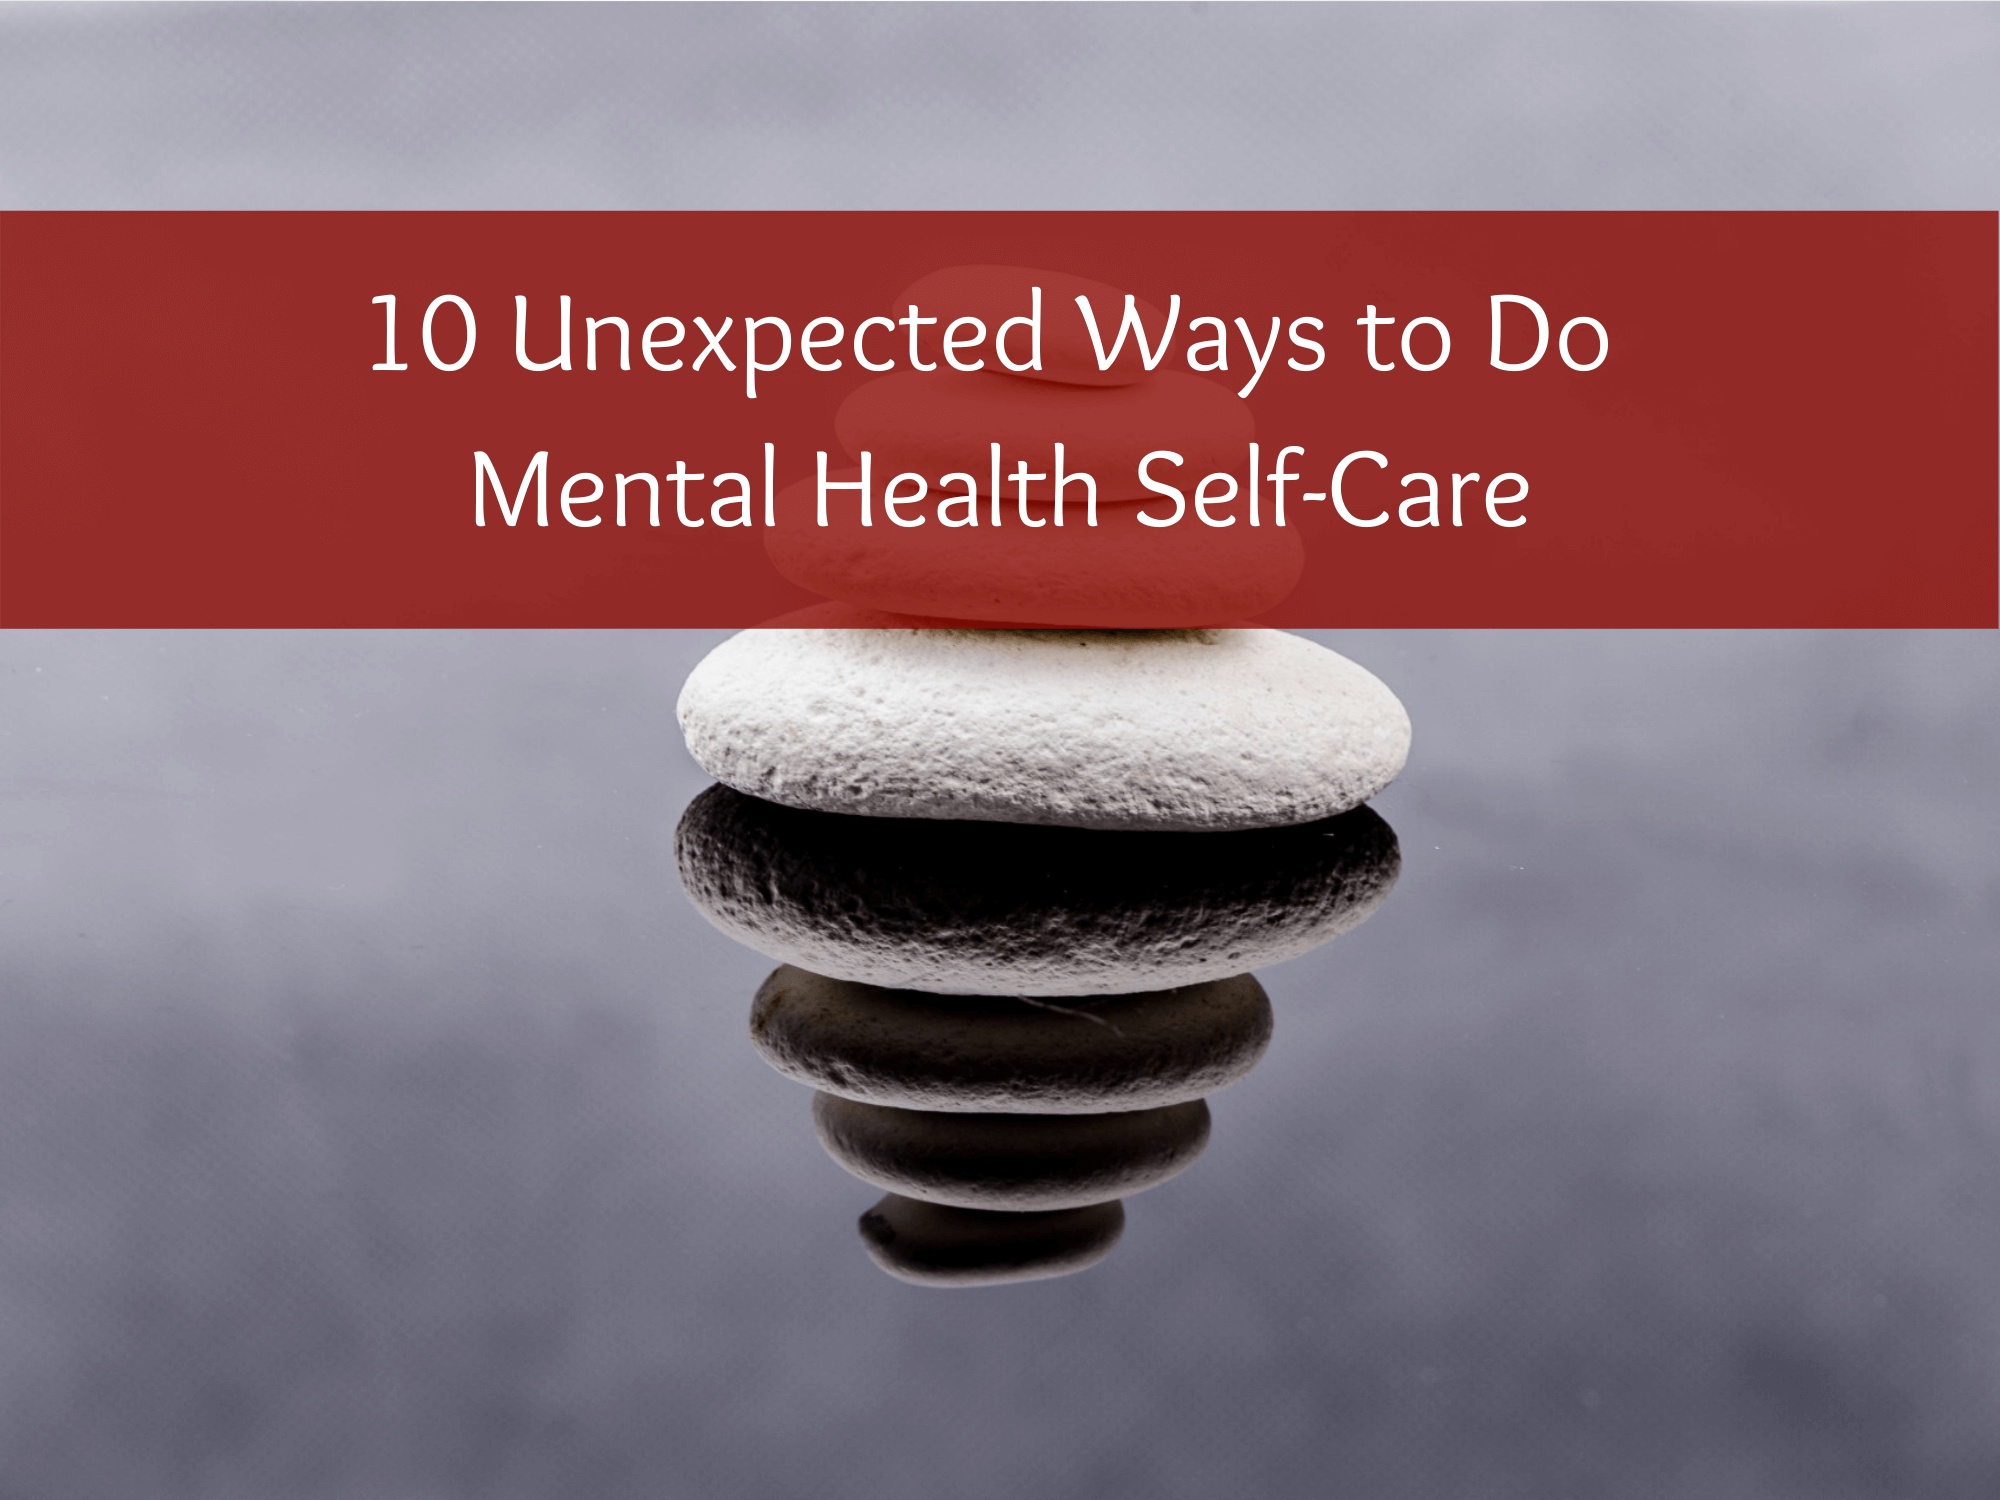 10 Unexpected Ways to Do Mental Health Self-Care